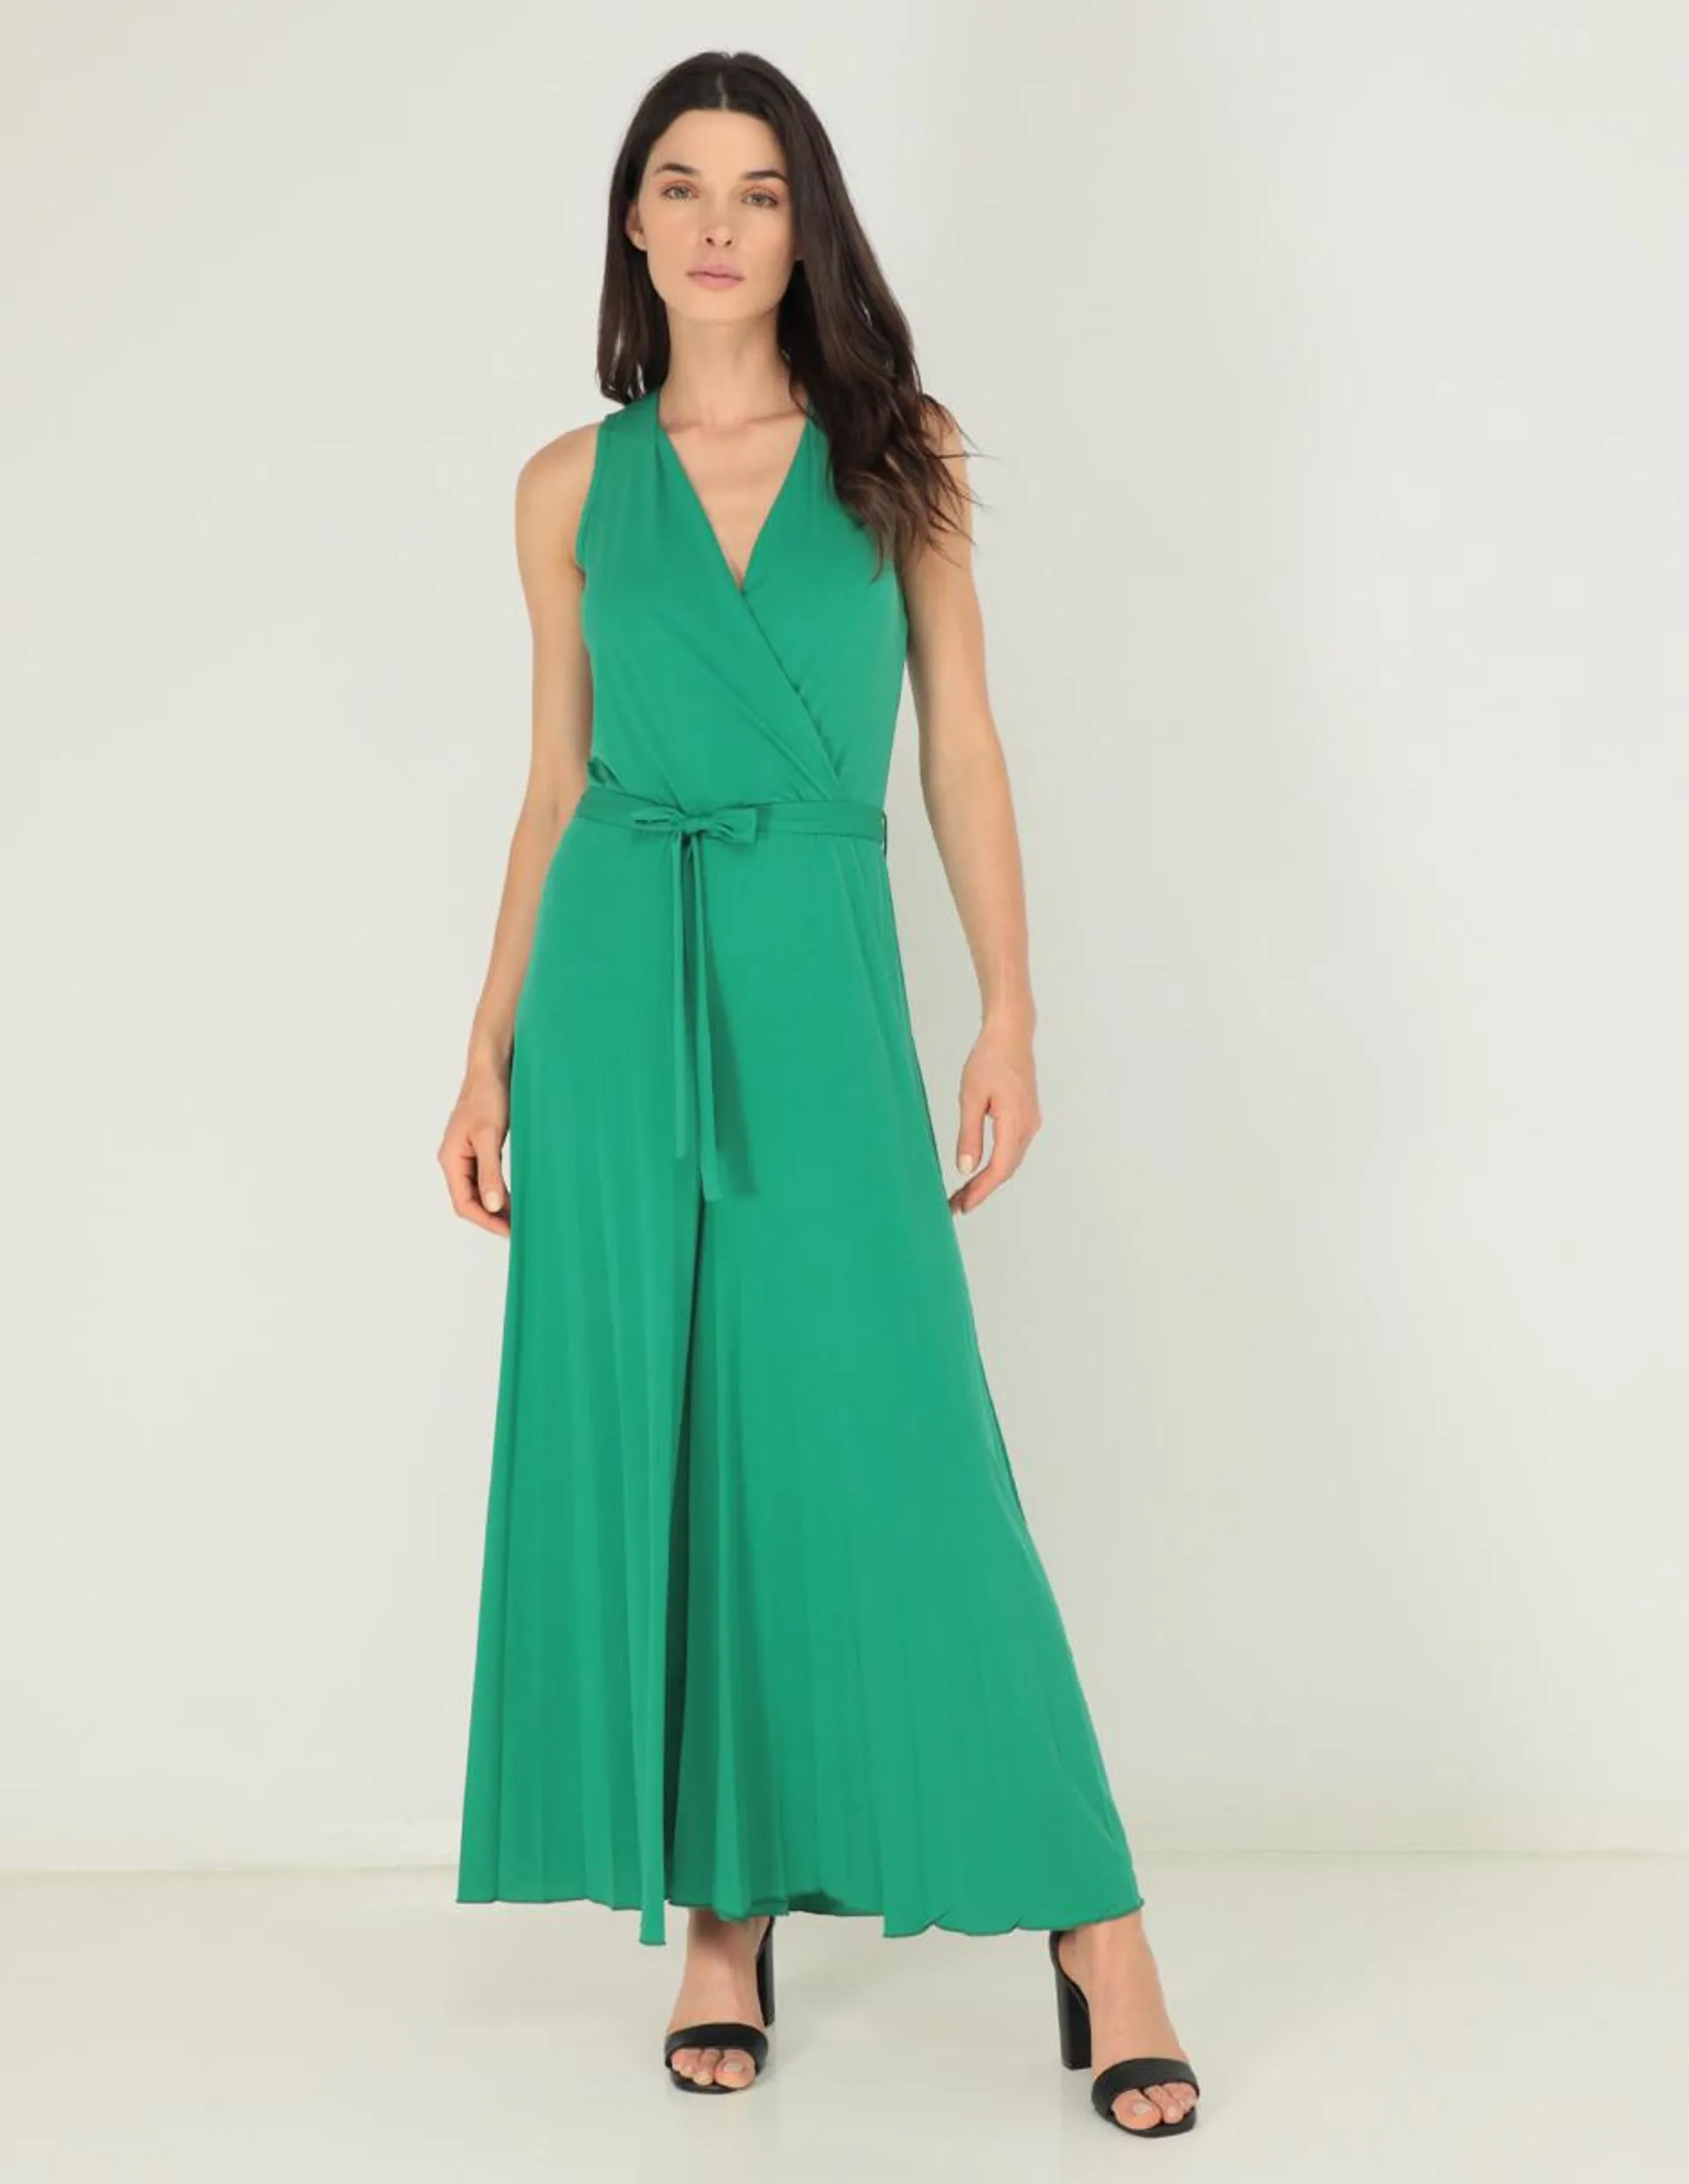 Jumpsuit Contempo formal para mujer